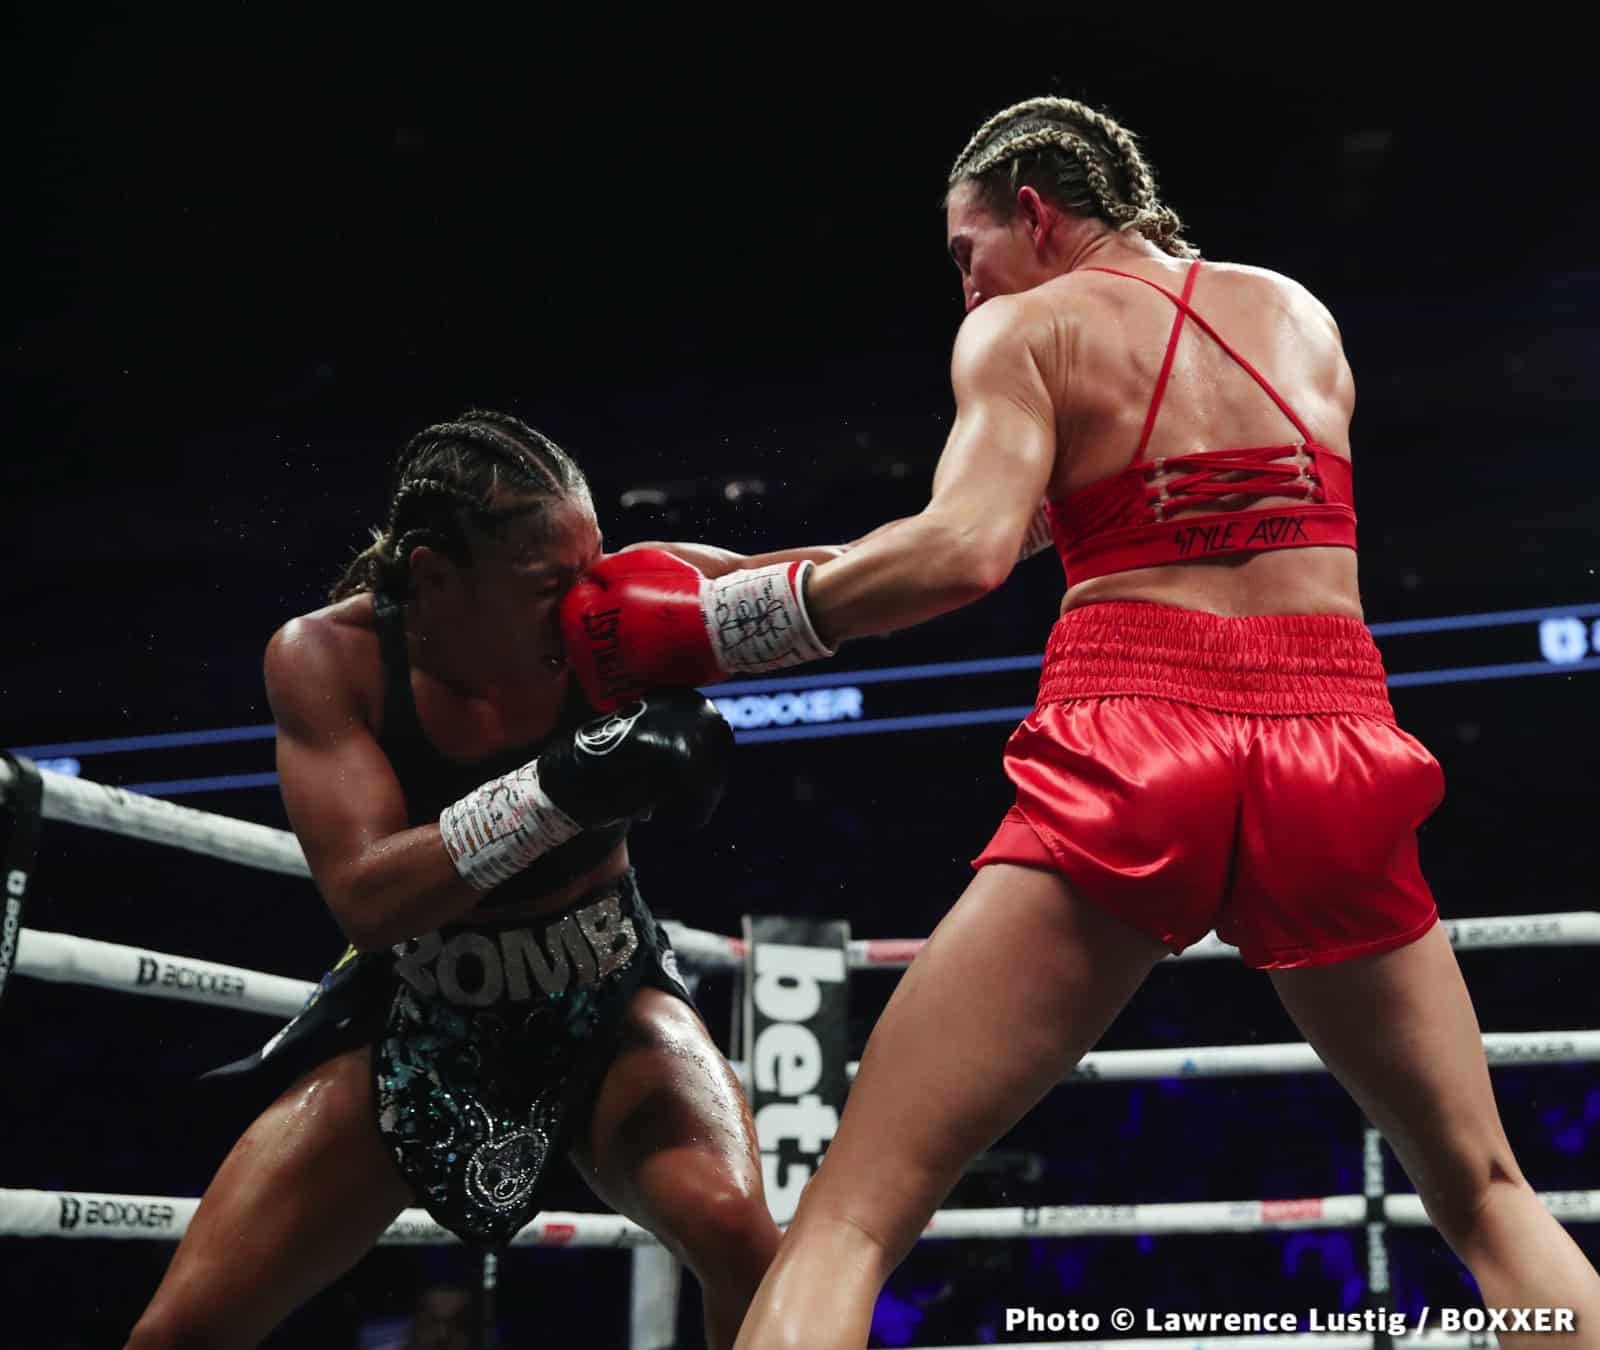 Image: Alycia Baumgardner Wins Unification Match And Now She's Focused On Becoming Undisputed